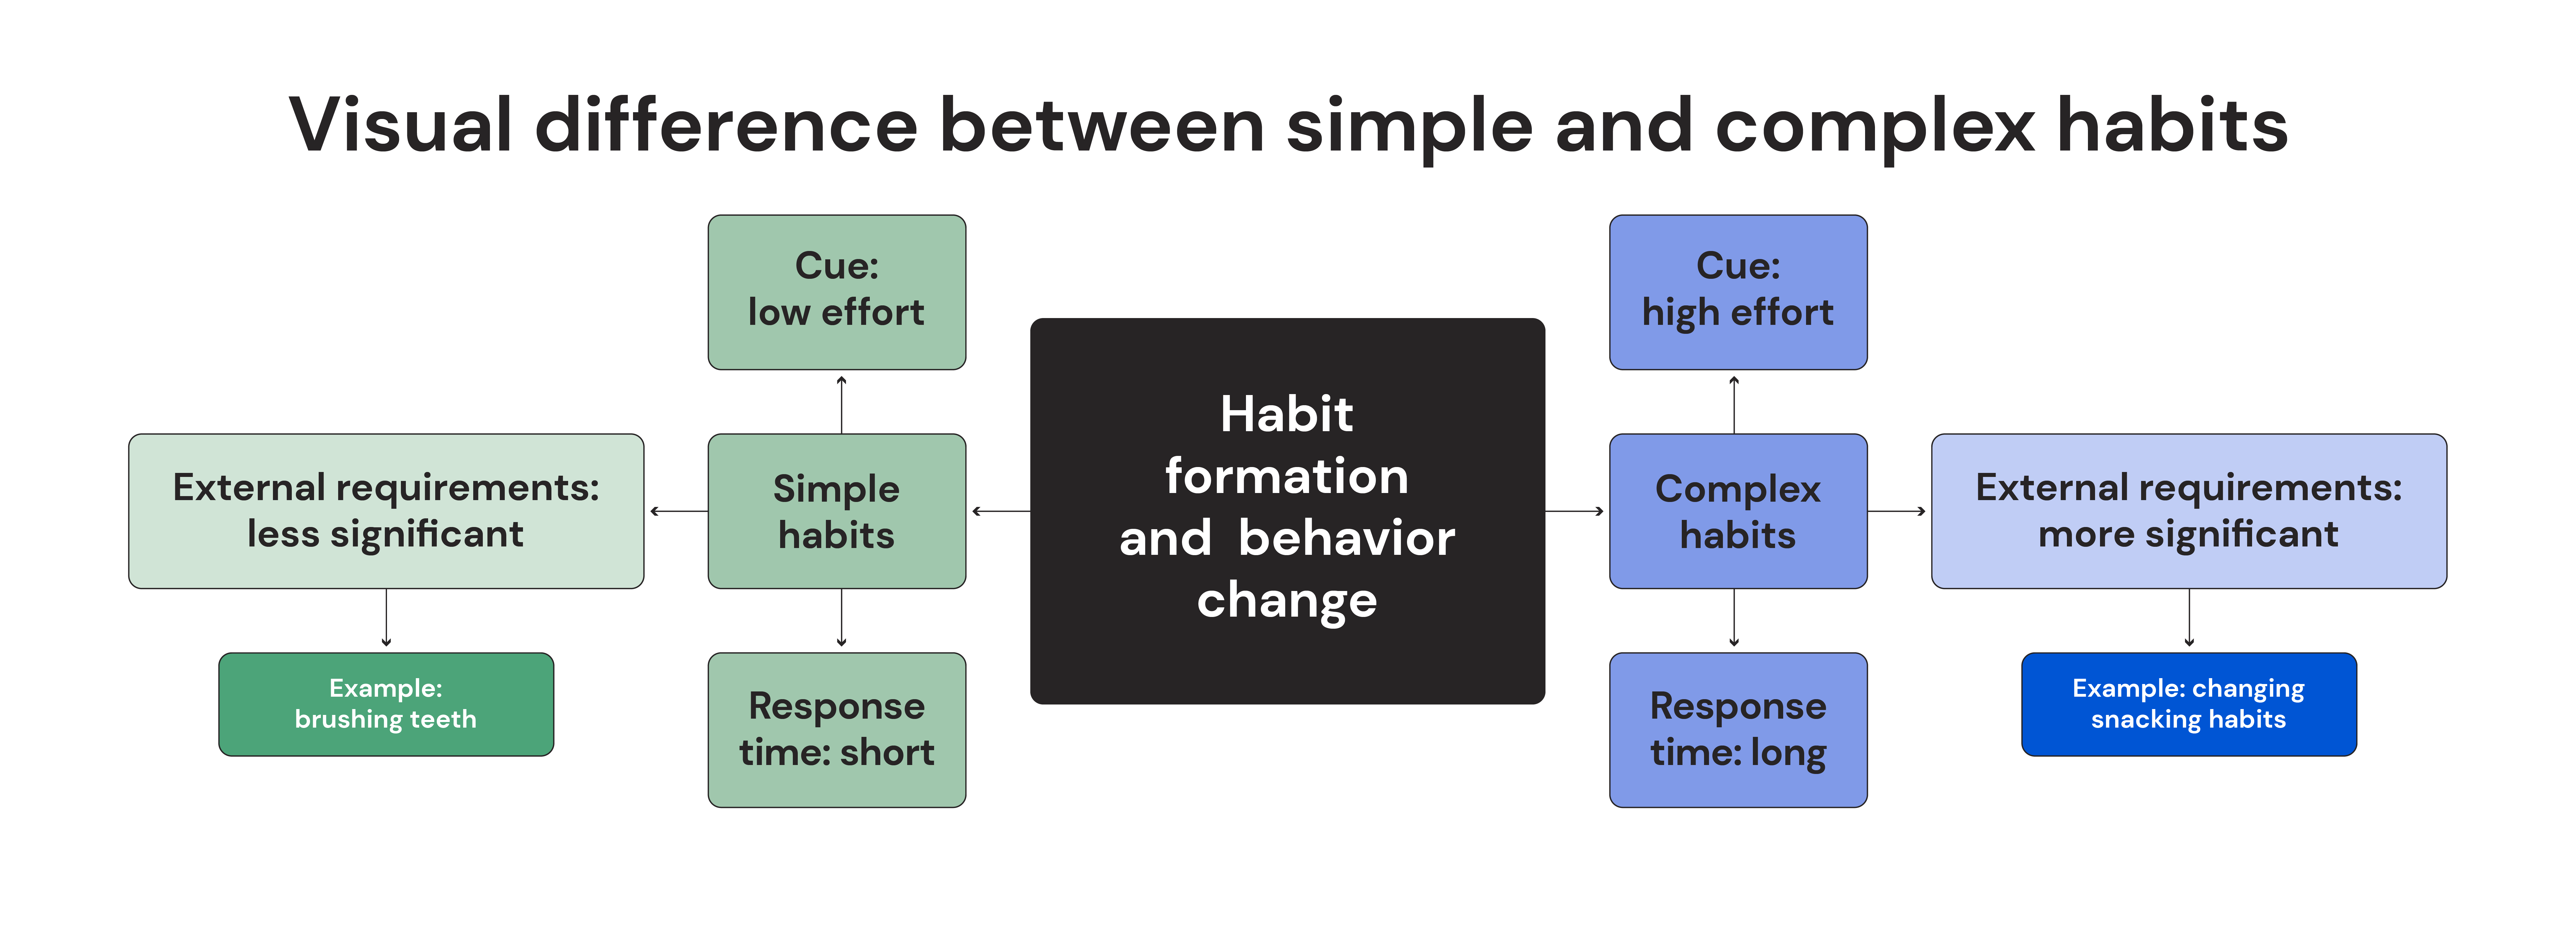 Visual difference between simple and complex habits